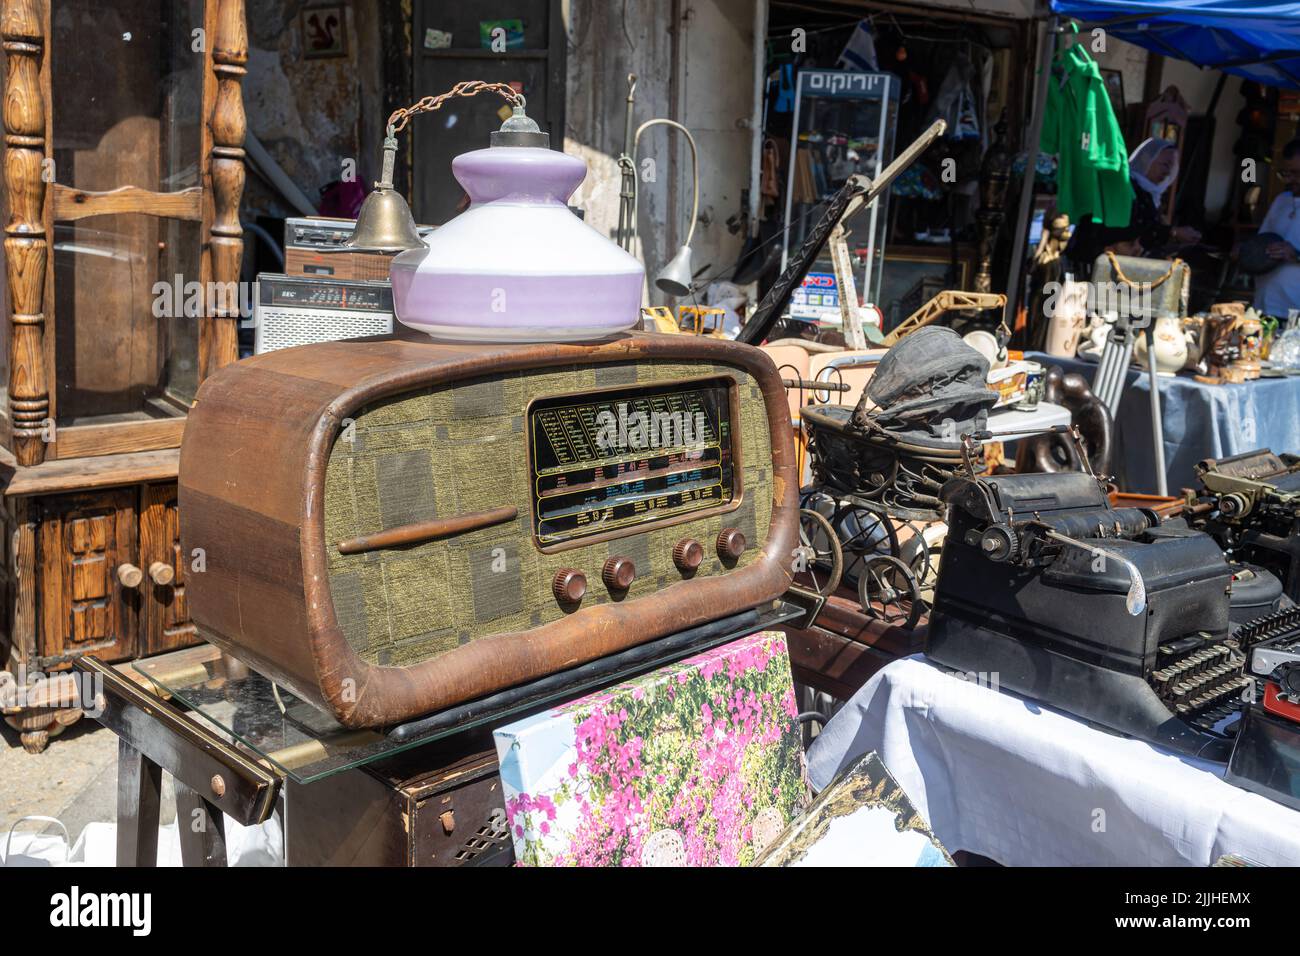 Haifa, Israel - 20 July 2022, Scene of the flea market, with sellers and shoppers, in downtown Haifa, Israel. The lamp stands on an old radiogram Stock Photo